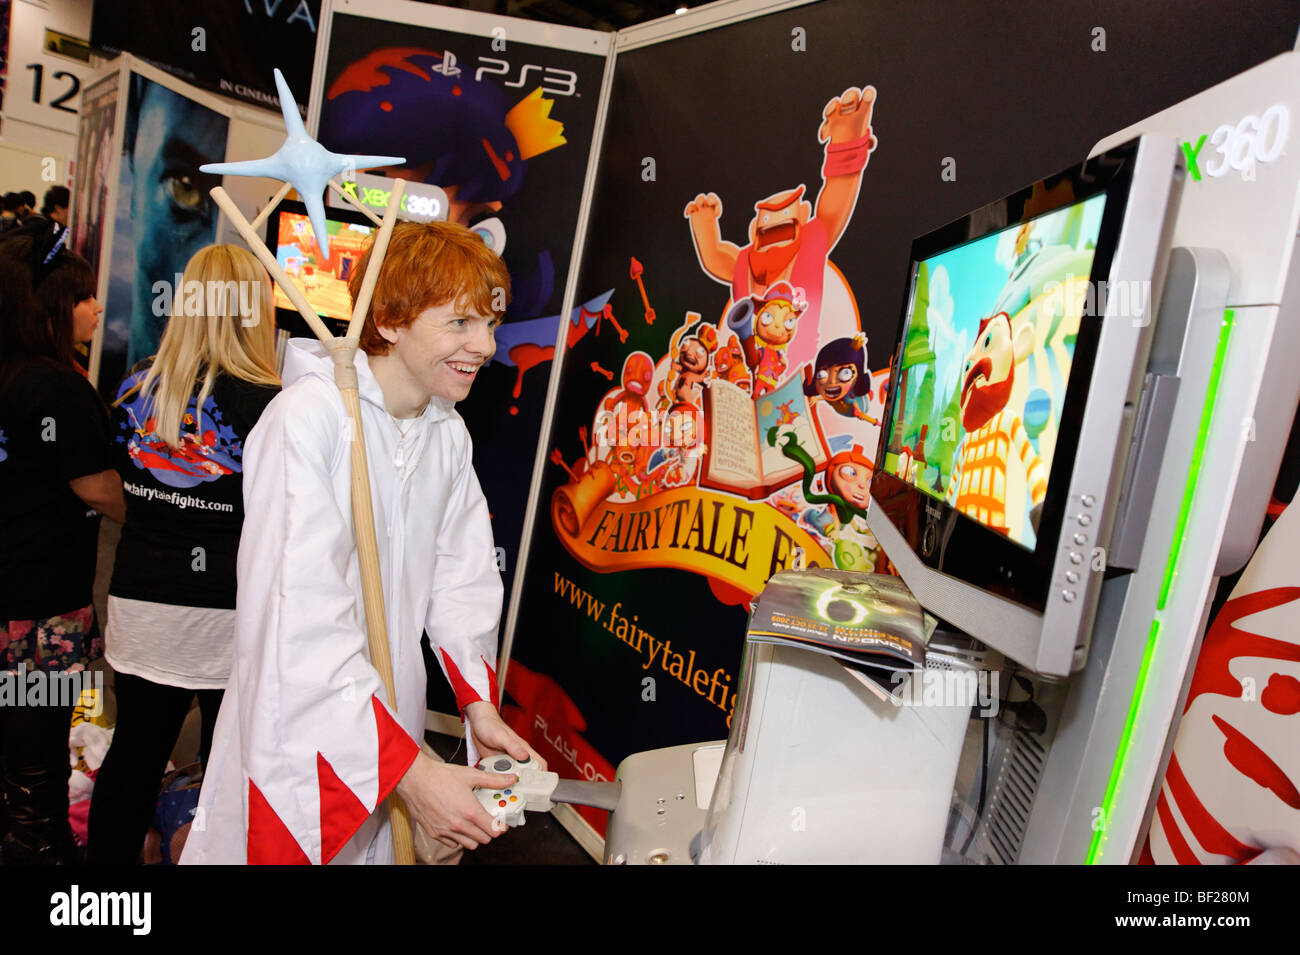 Fans playing video games at the London MCM expo. Britain 2009. Stock Photo